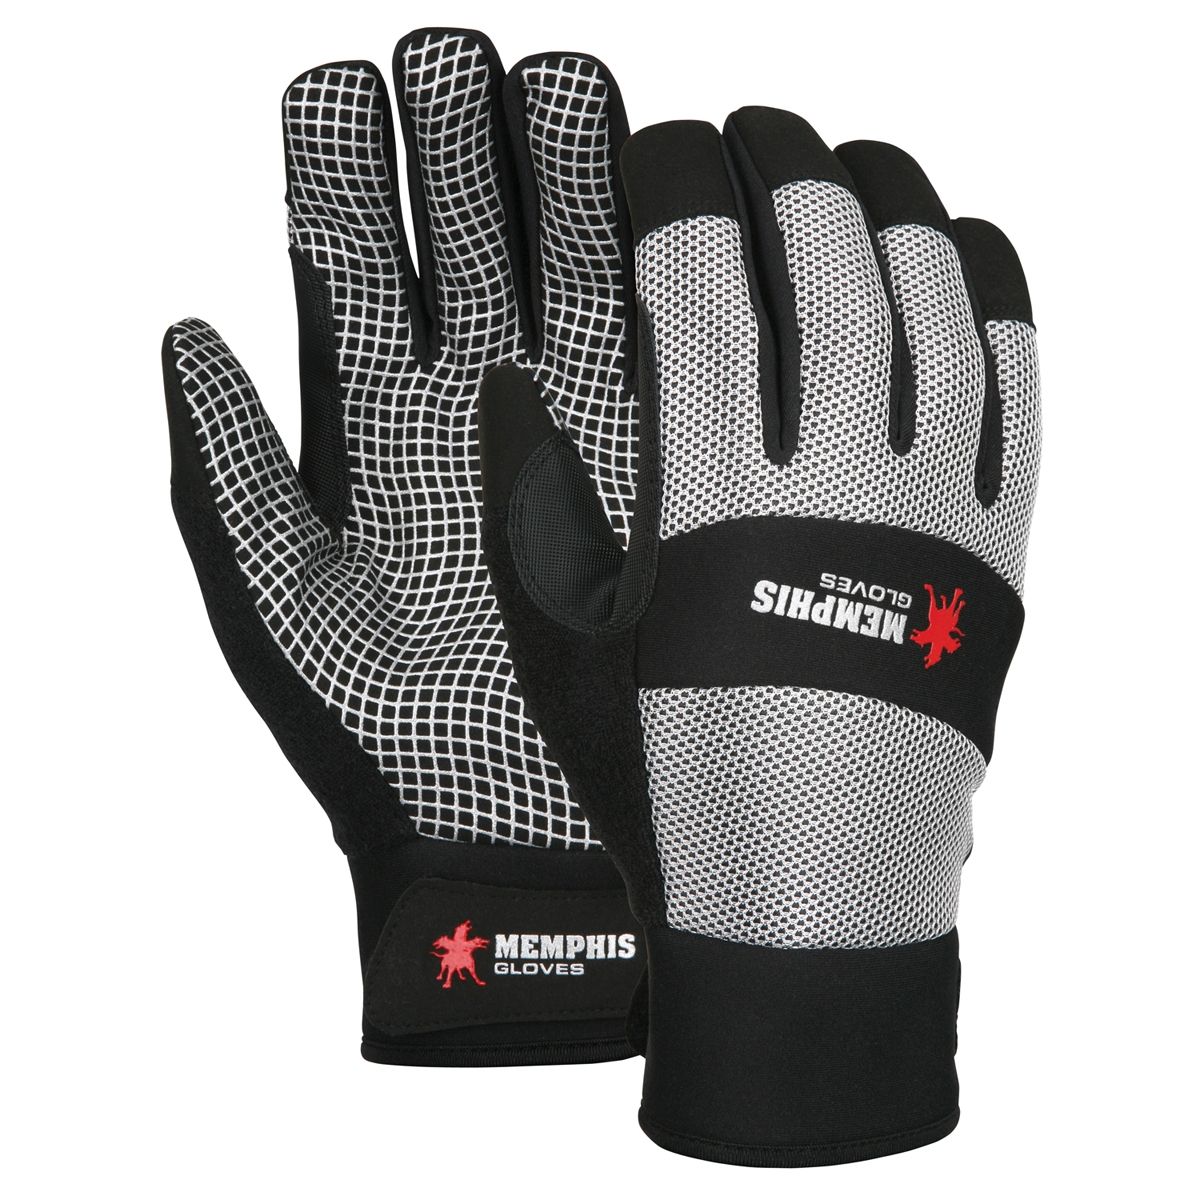 1-Pair MCR Safety 909M Memphis Synthetic Palm Multi-Task Gloves with Adjustable Wrist Closure Silver/Black Medium